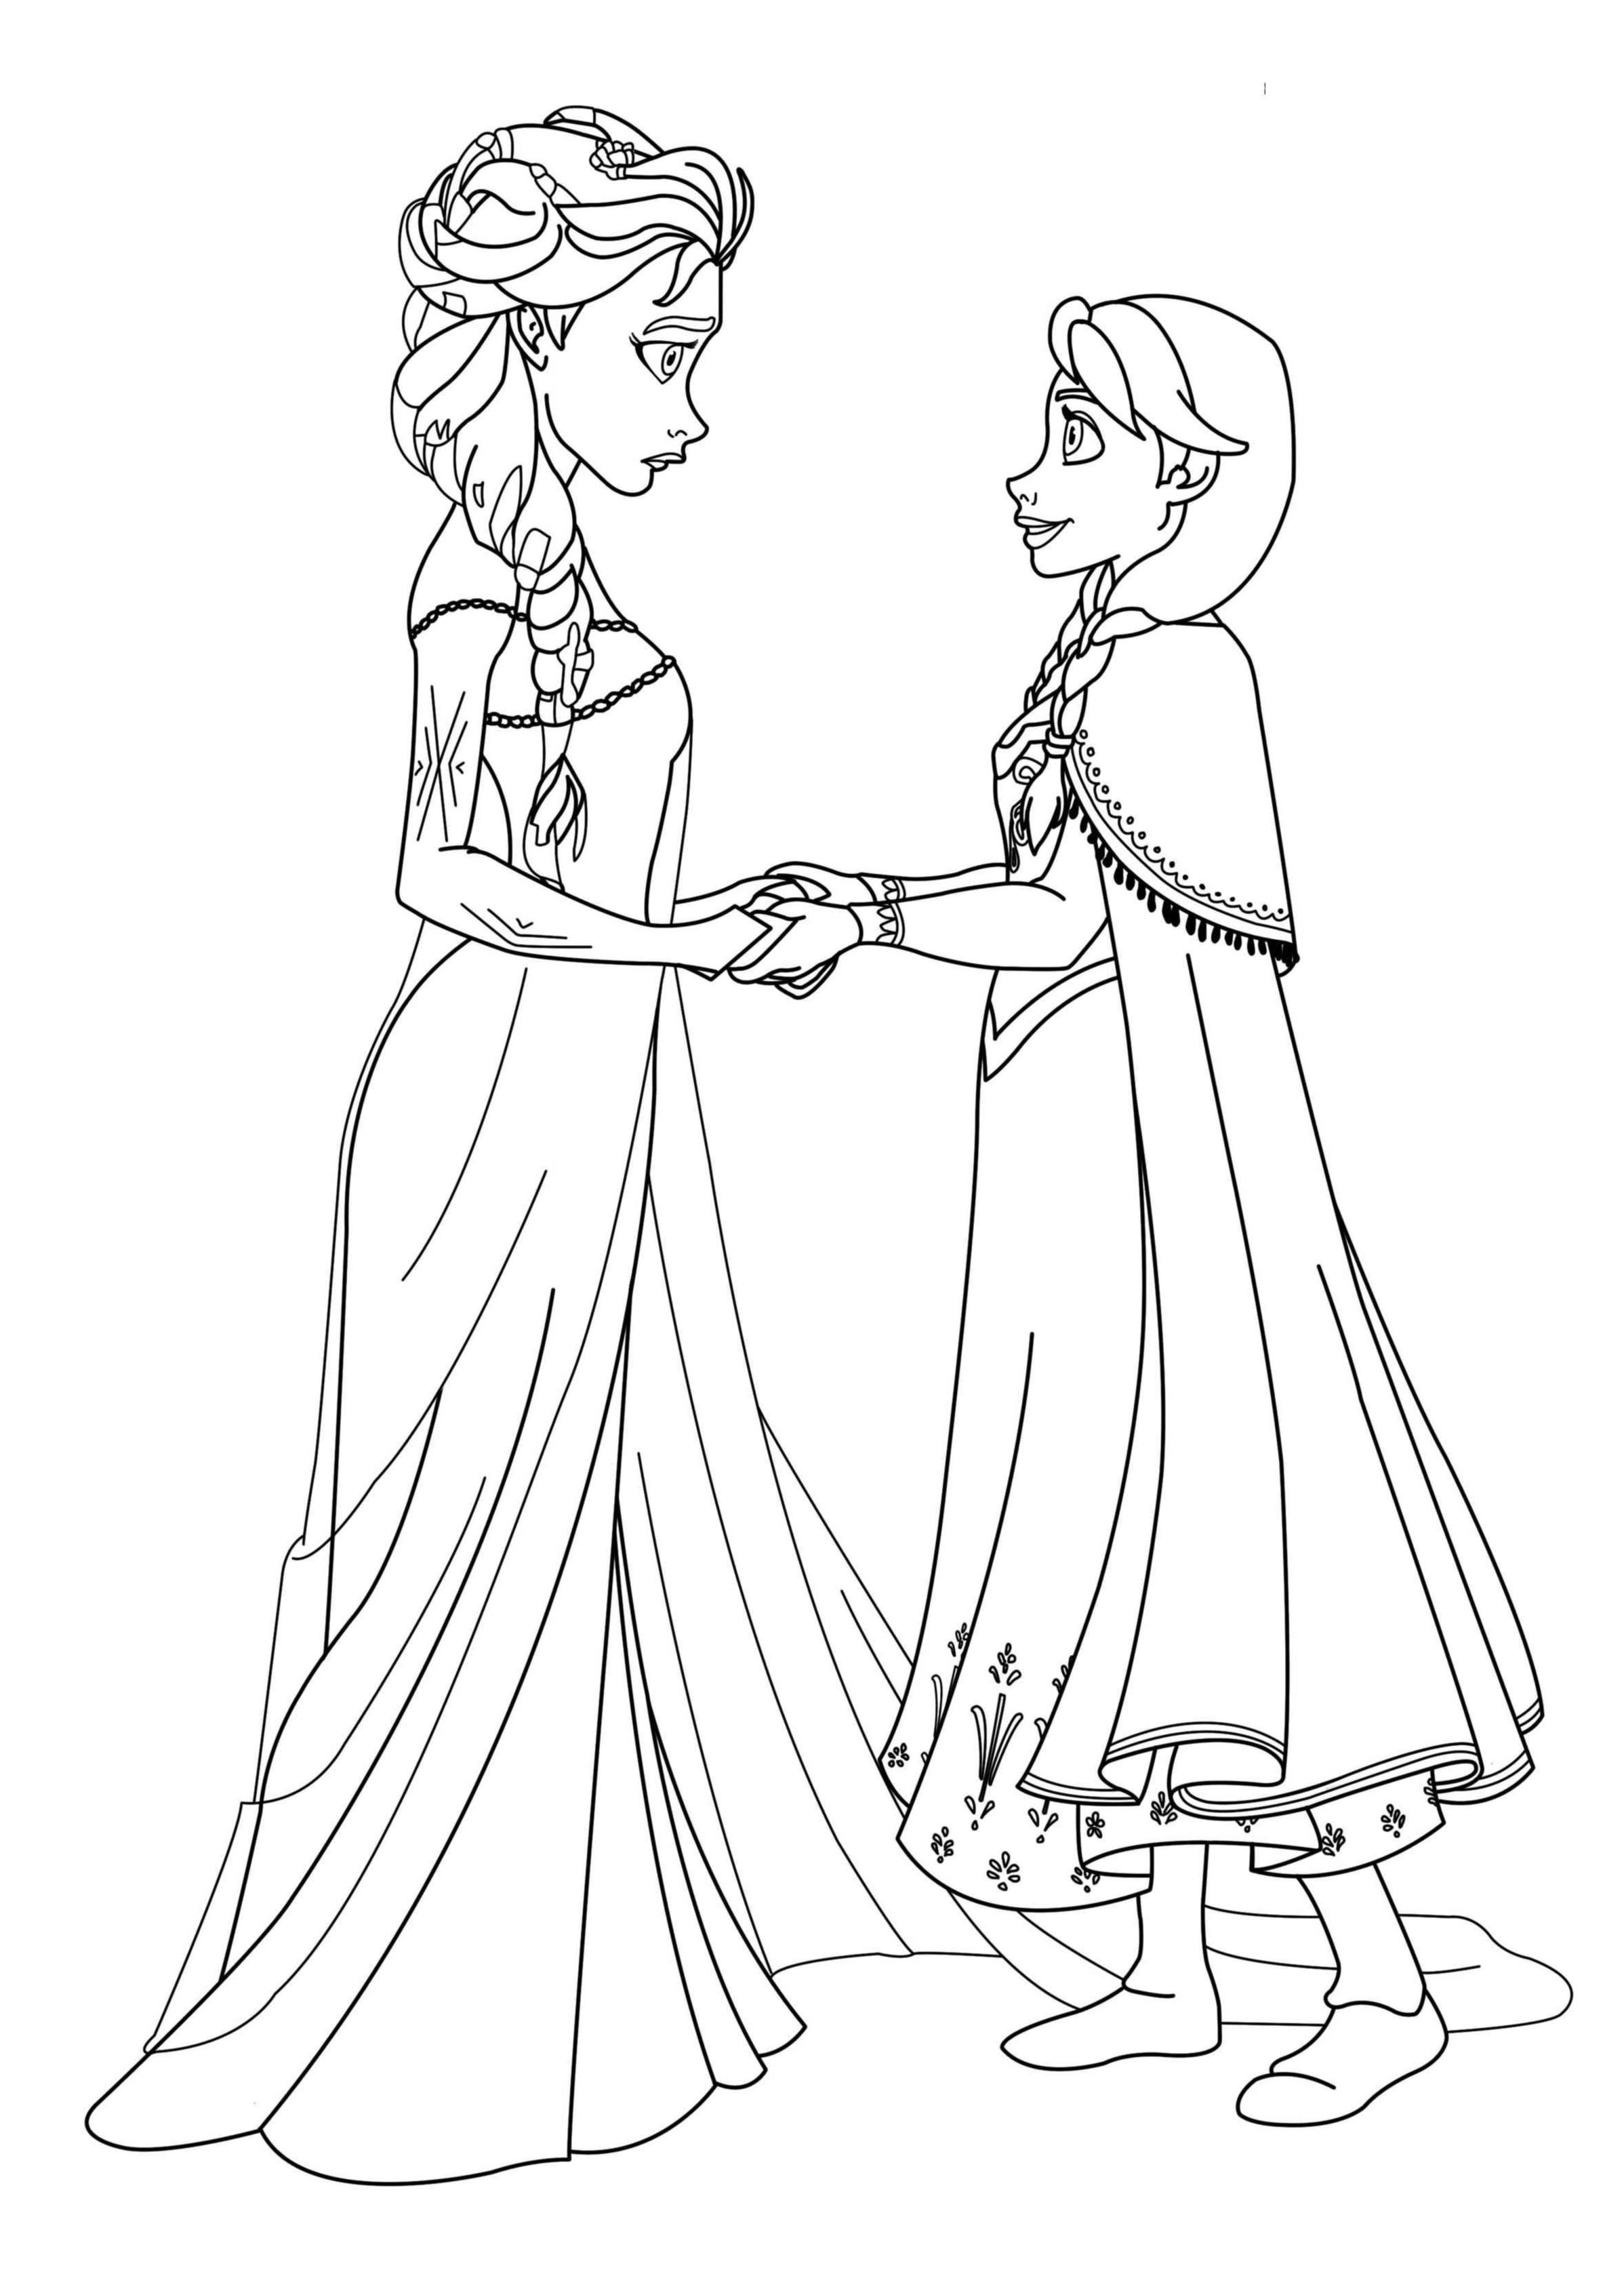 frozen free to color for children frozen kids coloring pages